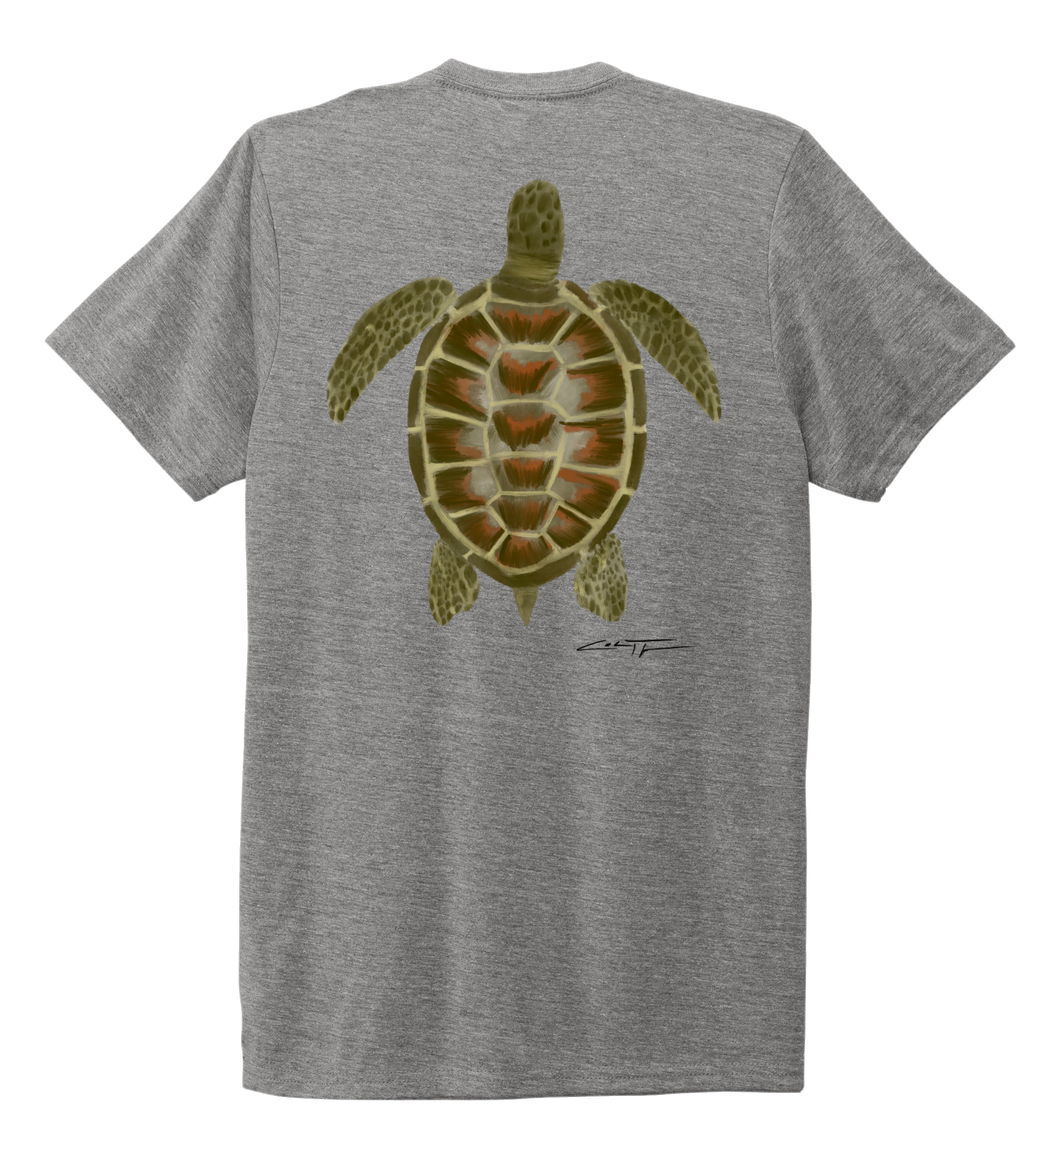 Colin Thompson, Turtle, Crew Neck T-Shirt in Oyster Grey